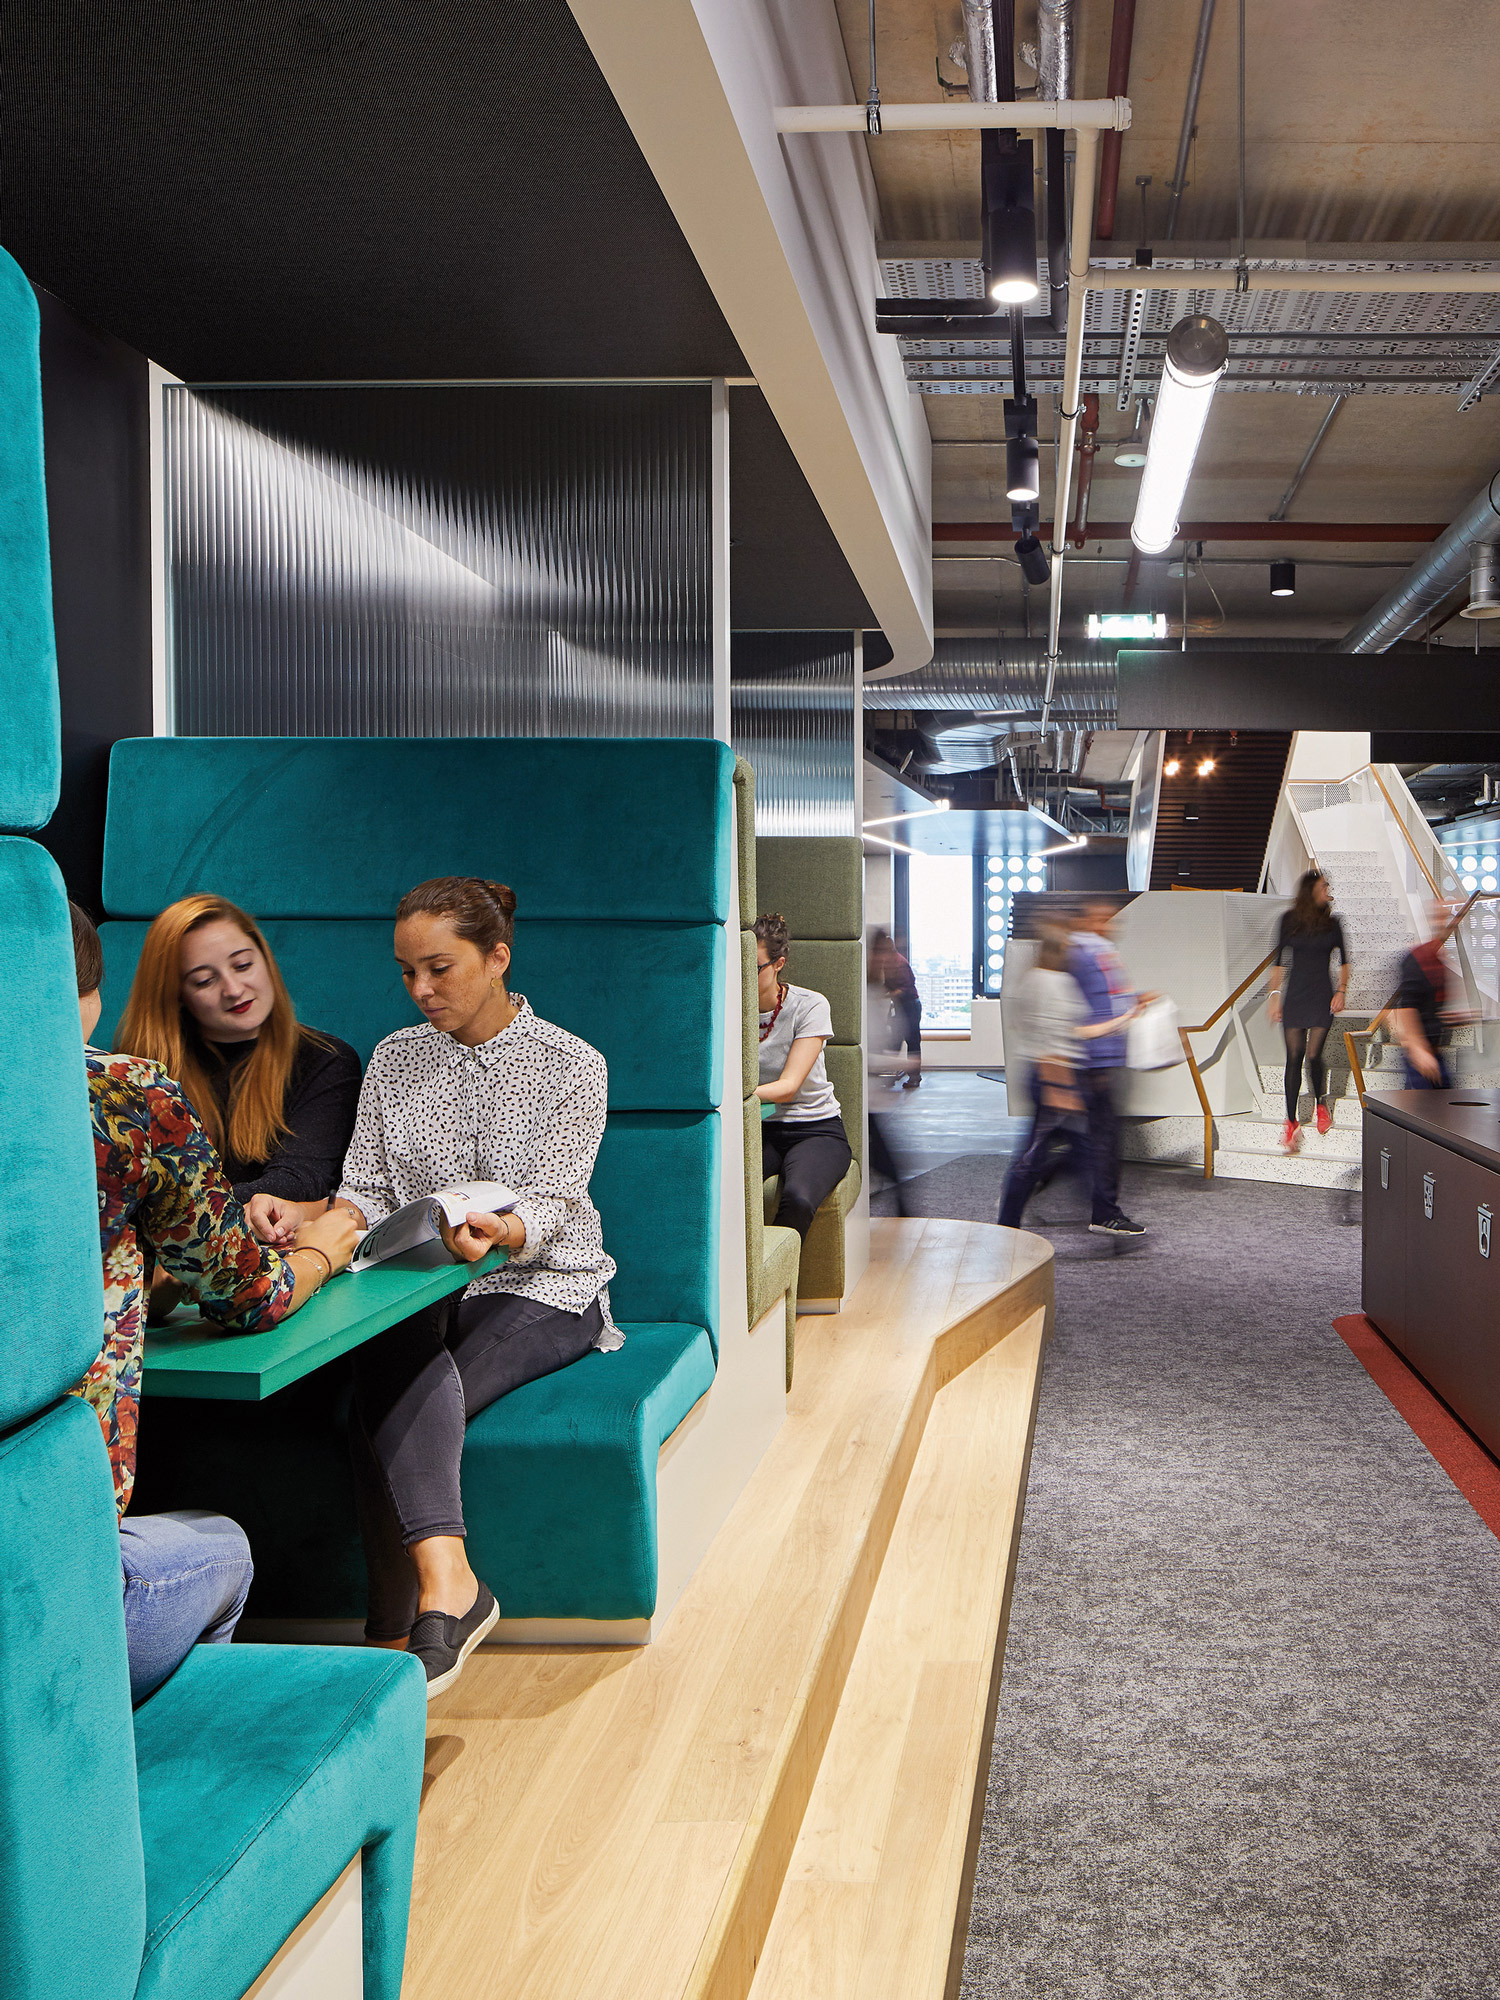 A high-backed, teal booth seating with integrated shelving offers a private workspace in an open-plan office environment, as two professional women engage in a collaborative session against a backdrop of active colleagues in motion.